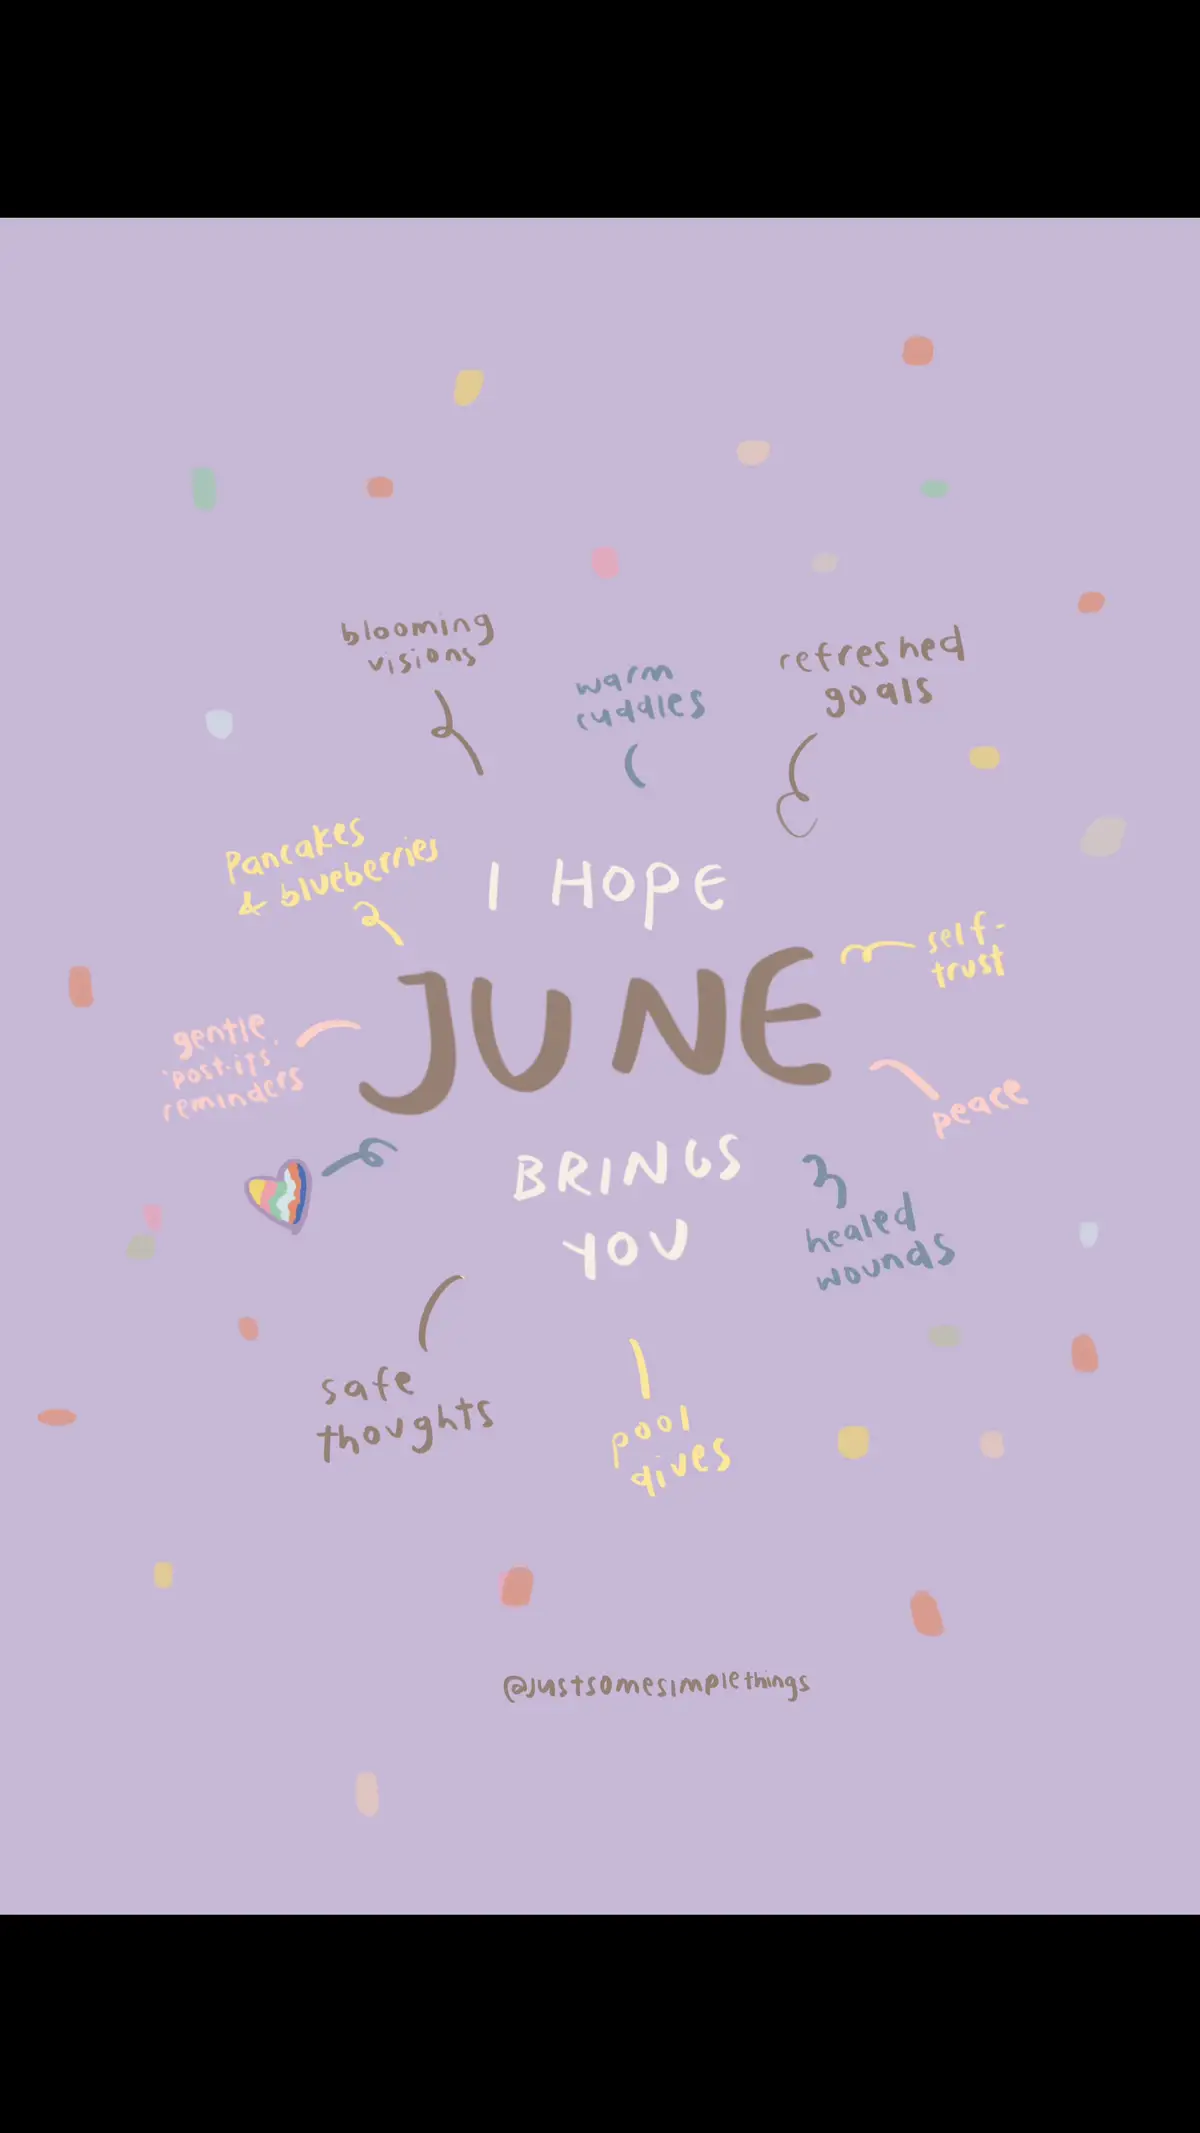 Onto June, the month where you trust your heart and find peace 🤍 #hellojune #affirmations #juneaffirmations #artformentalhealth #byemay 